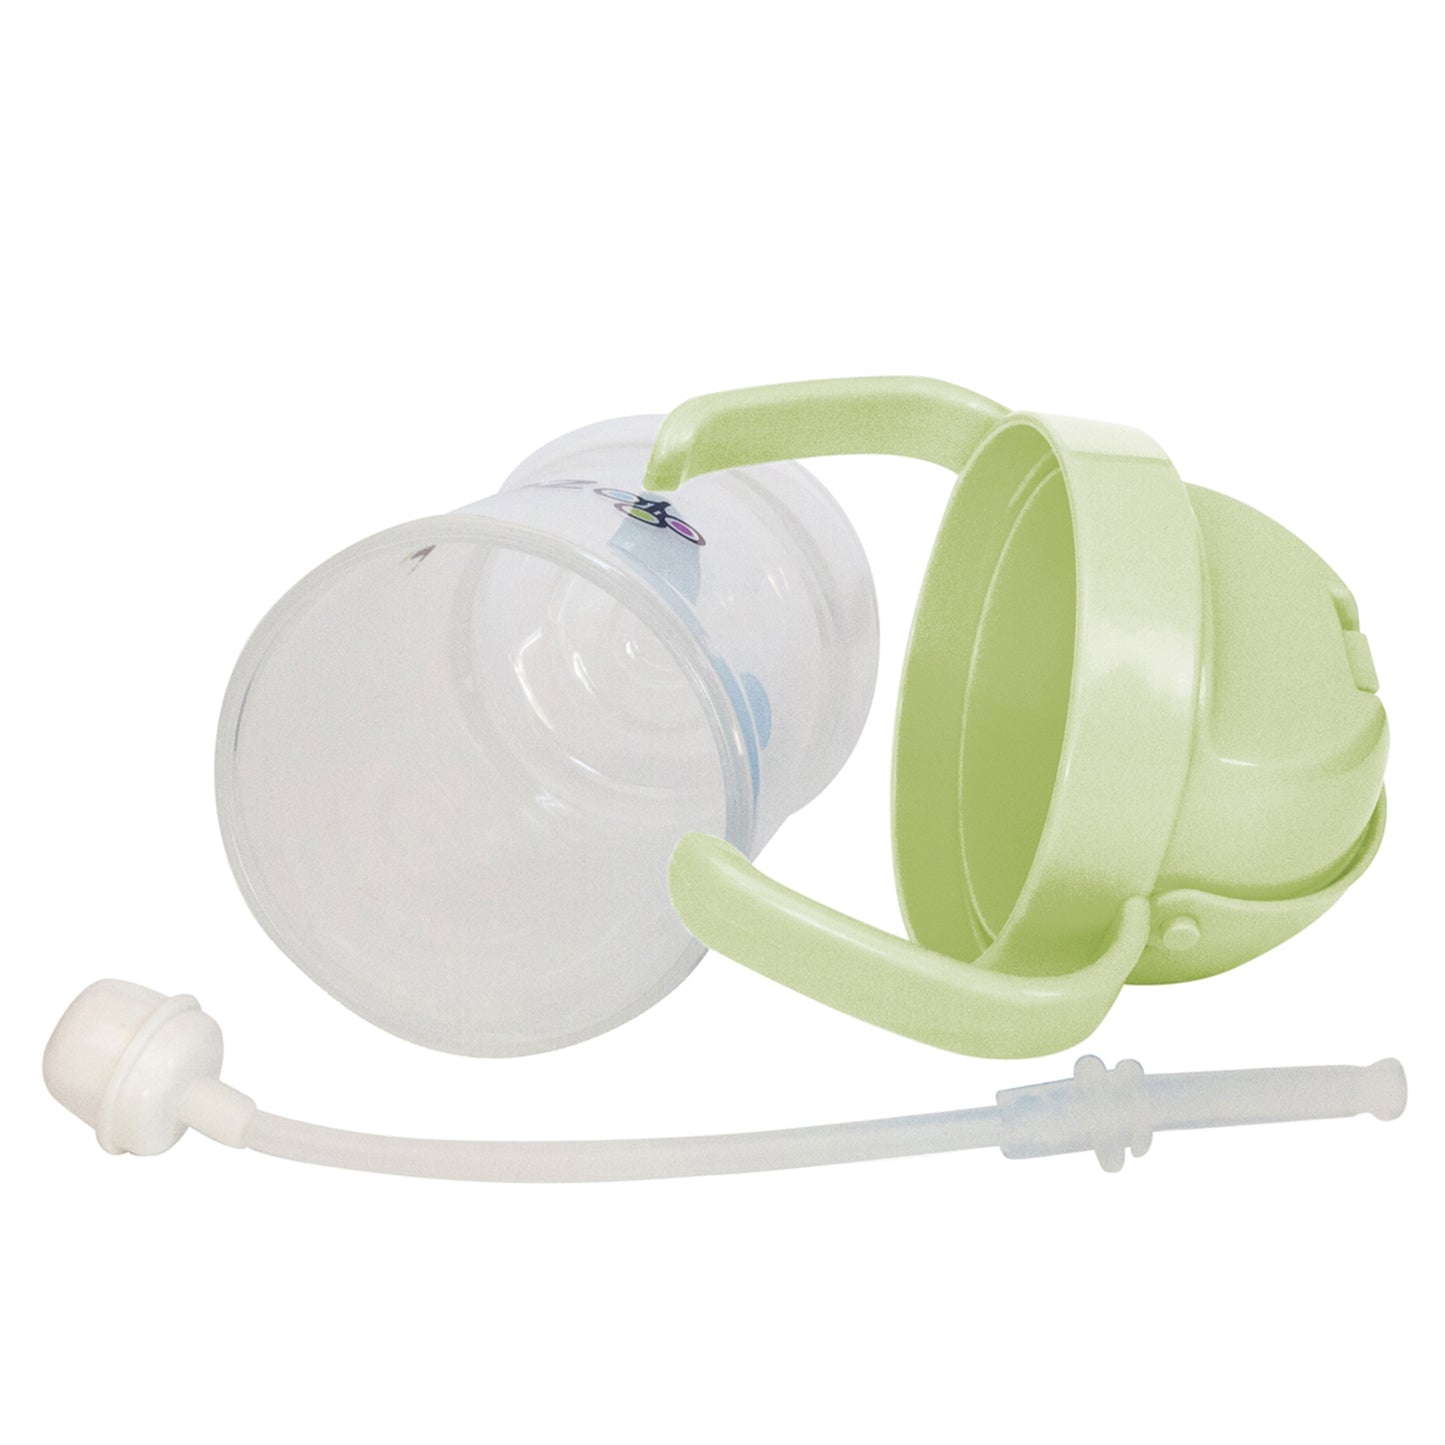 Bot weighted straw sippy cup - Sage Green